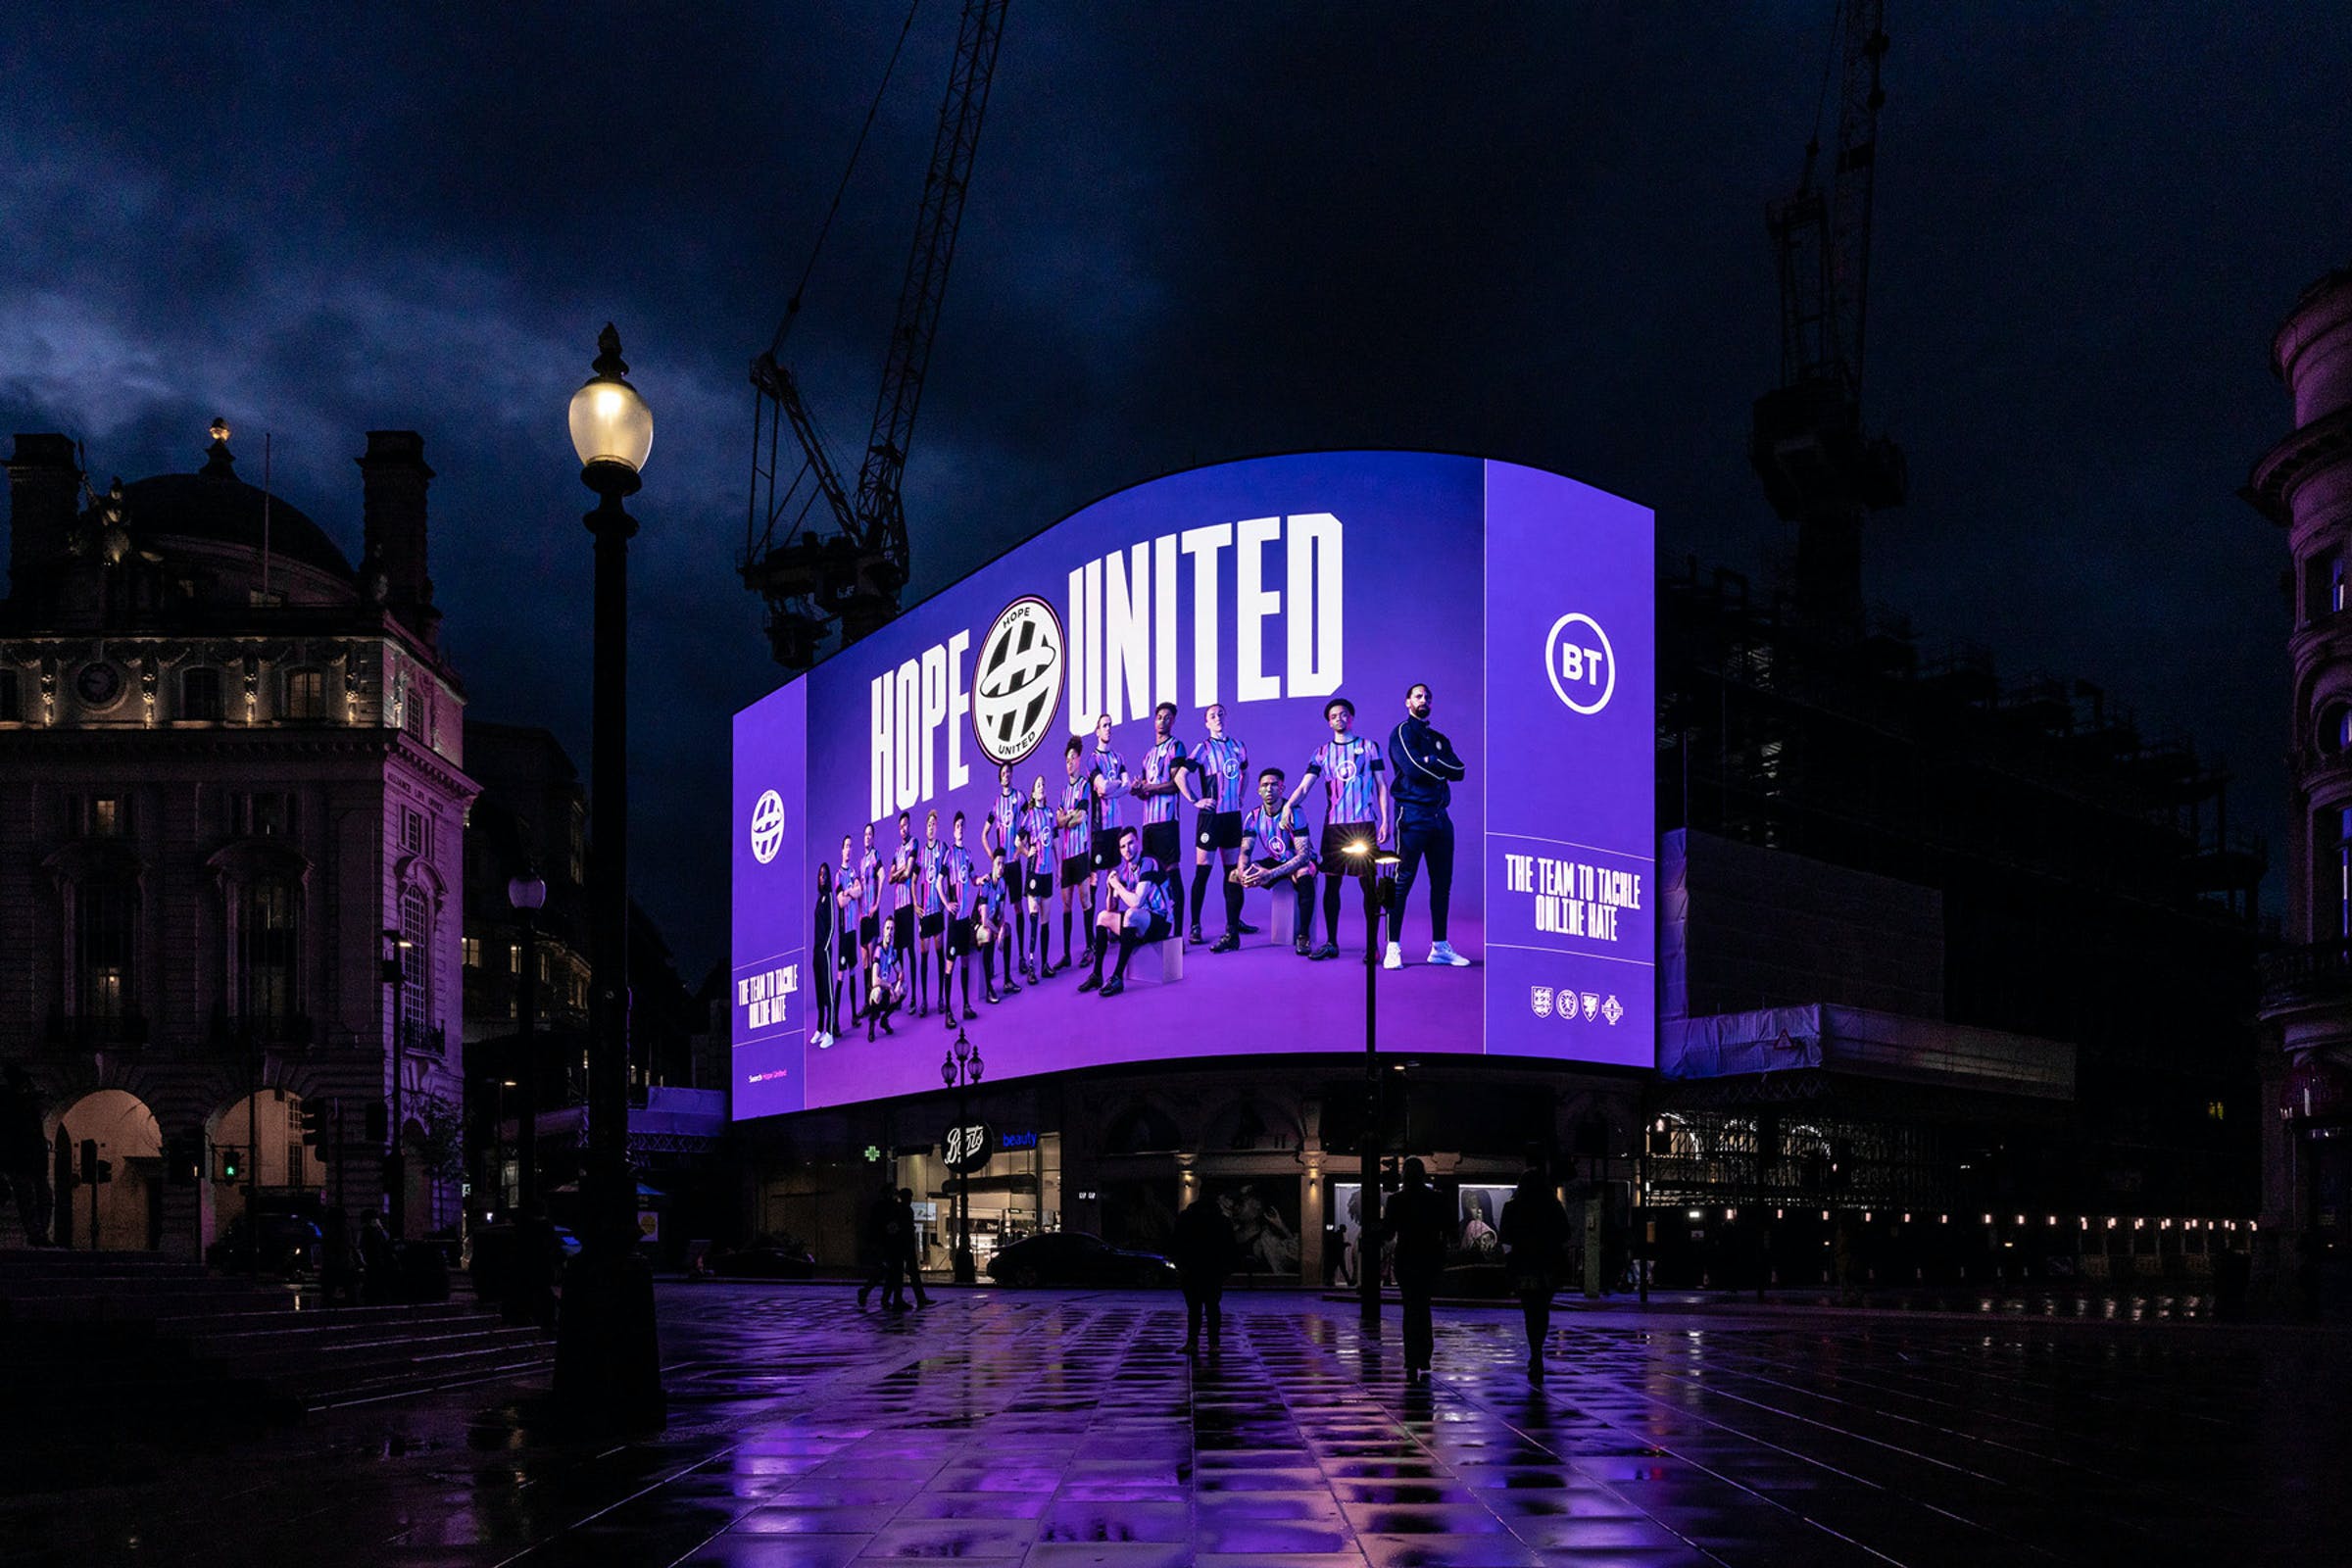 HOPE_UNITED_OOH_PICCADILLY_01_2021-05-25-113610